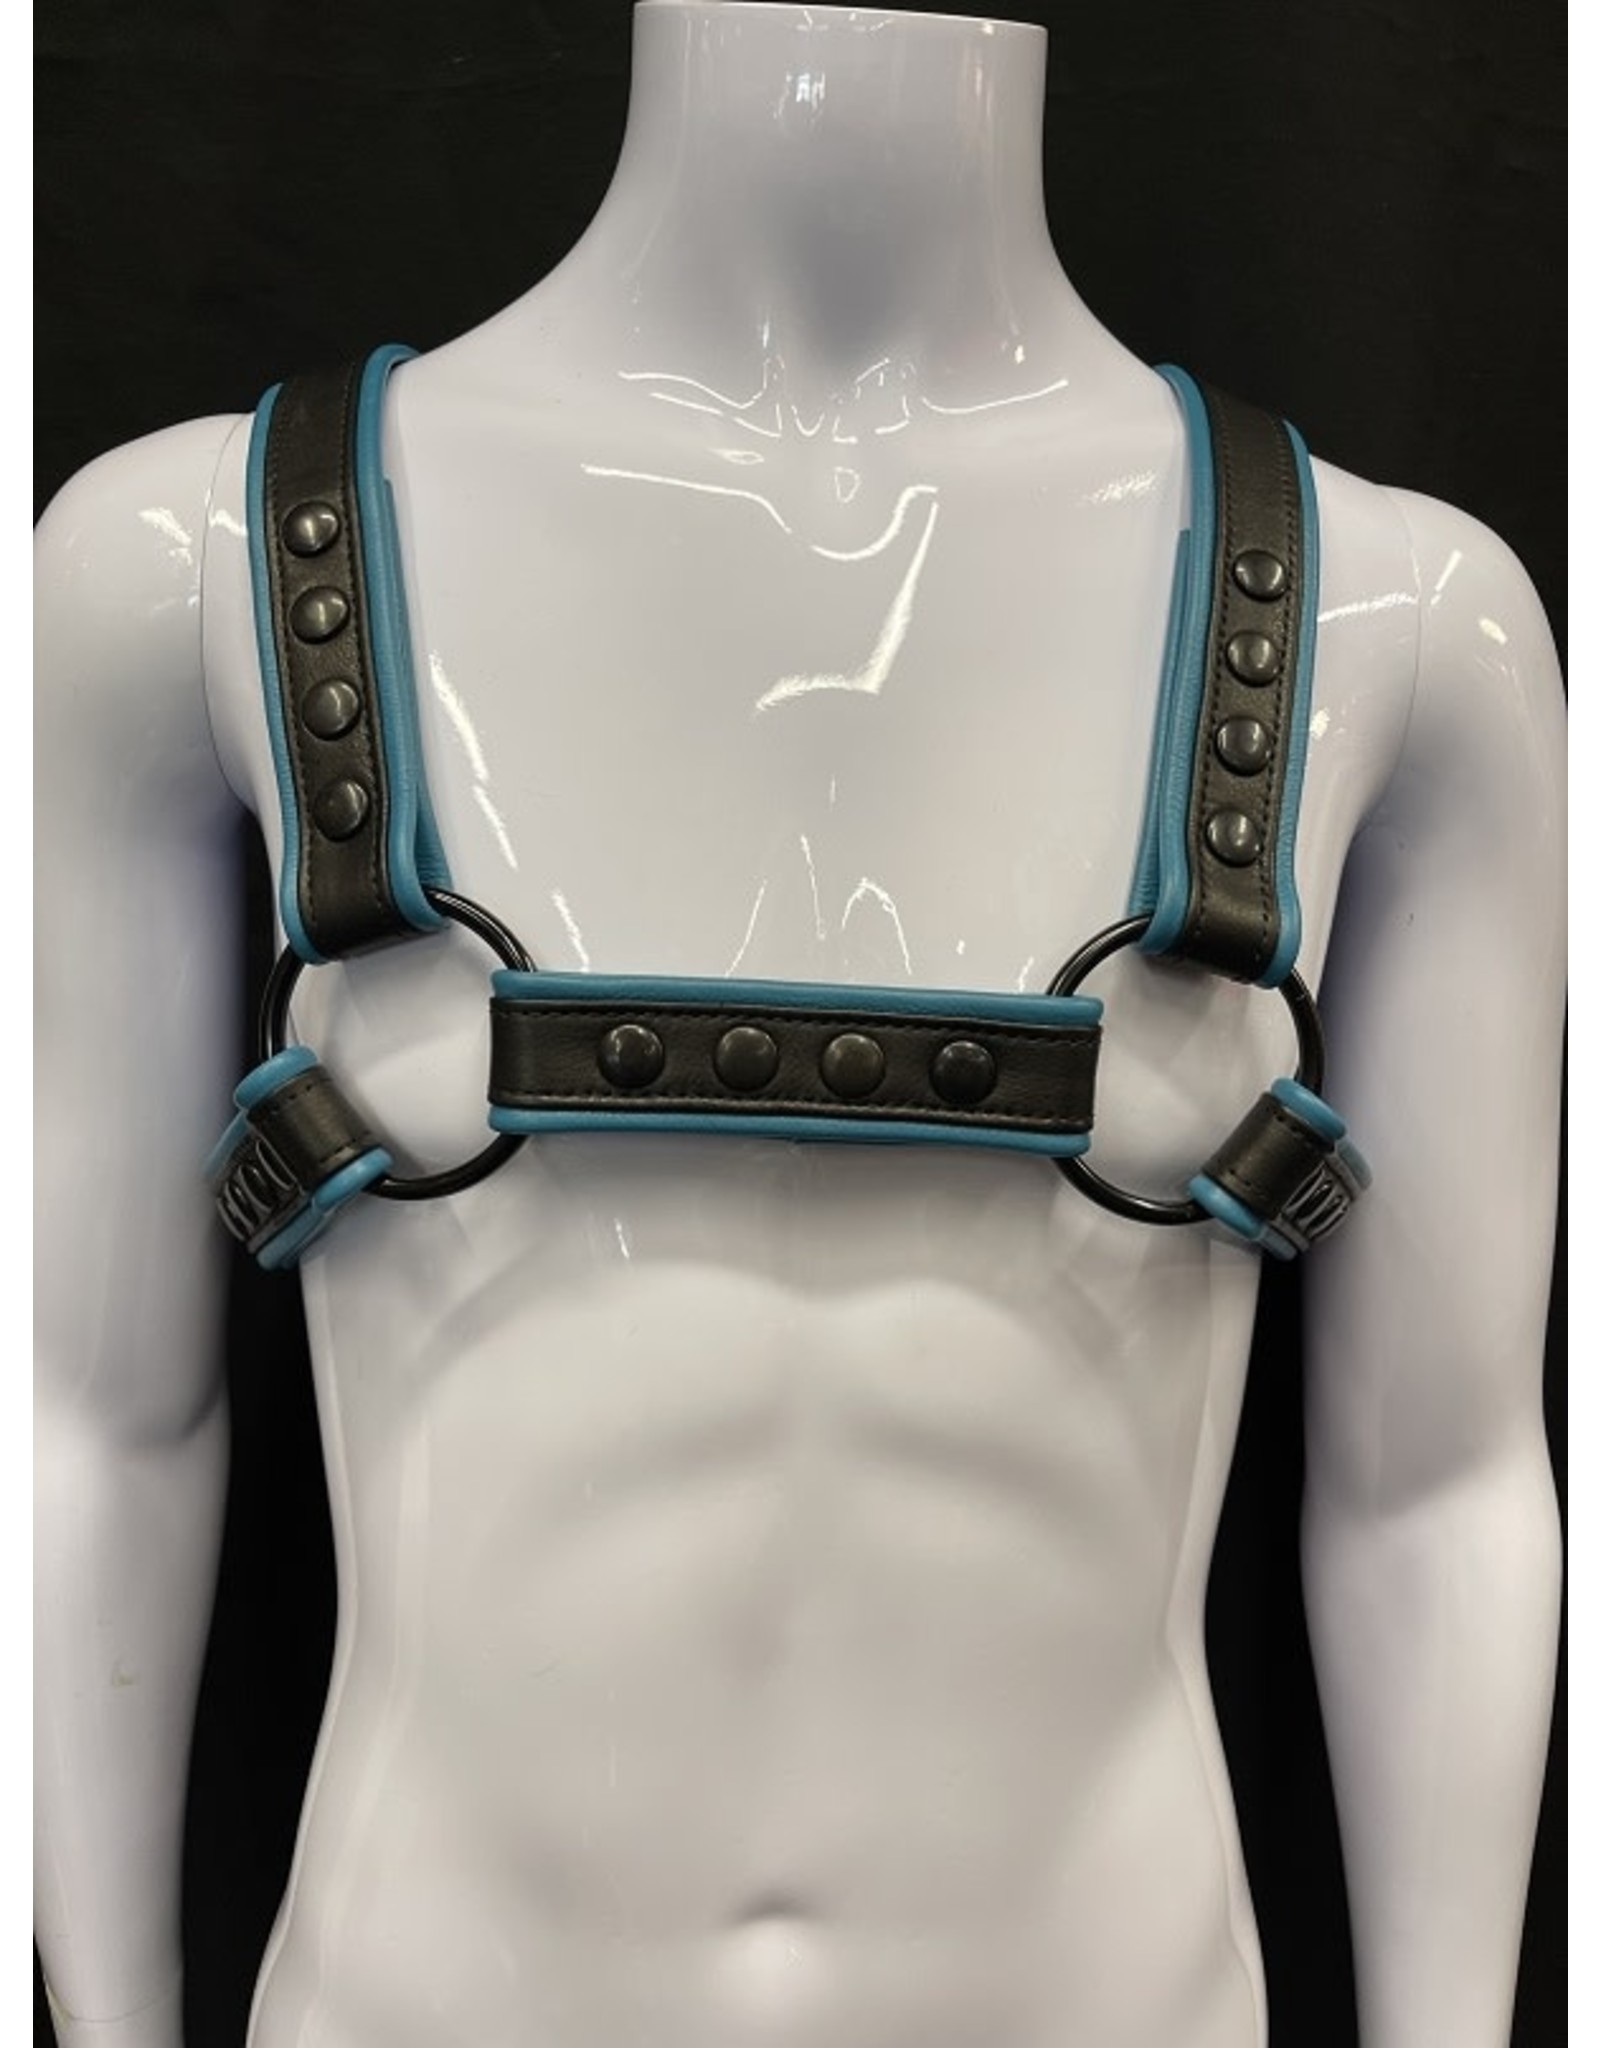 Amici Amici 2 Tone H Harness Blk Hardware - Various Colors